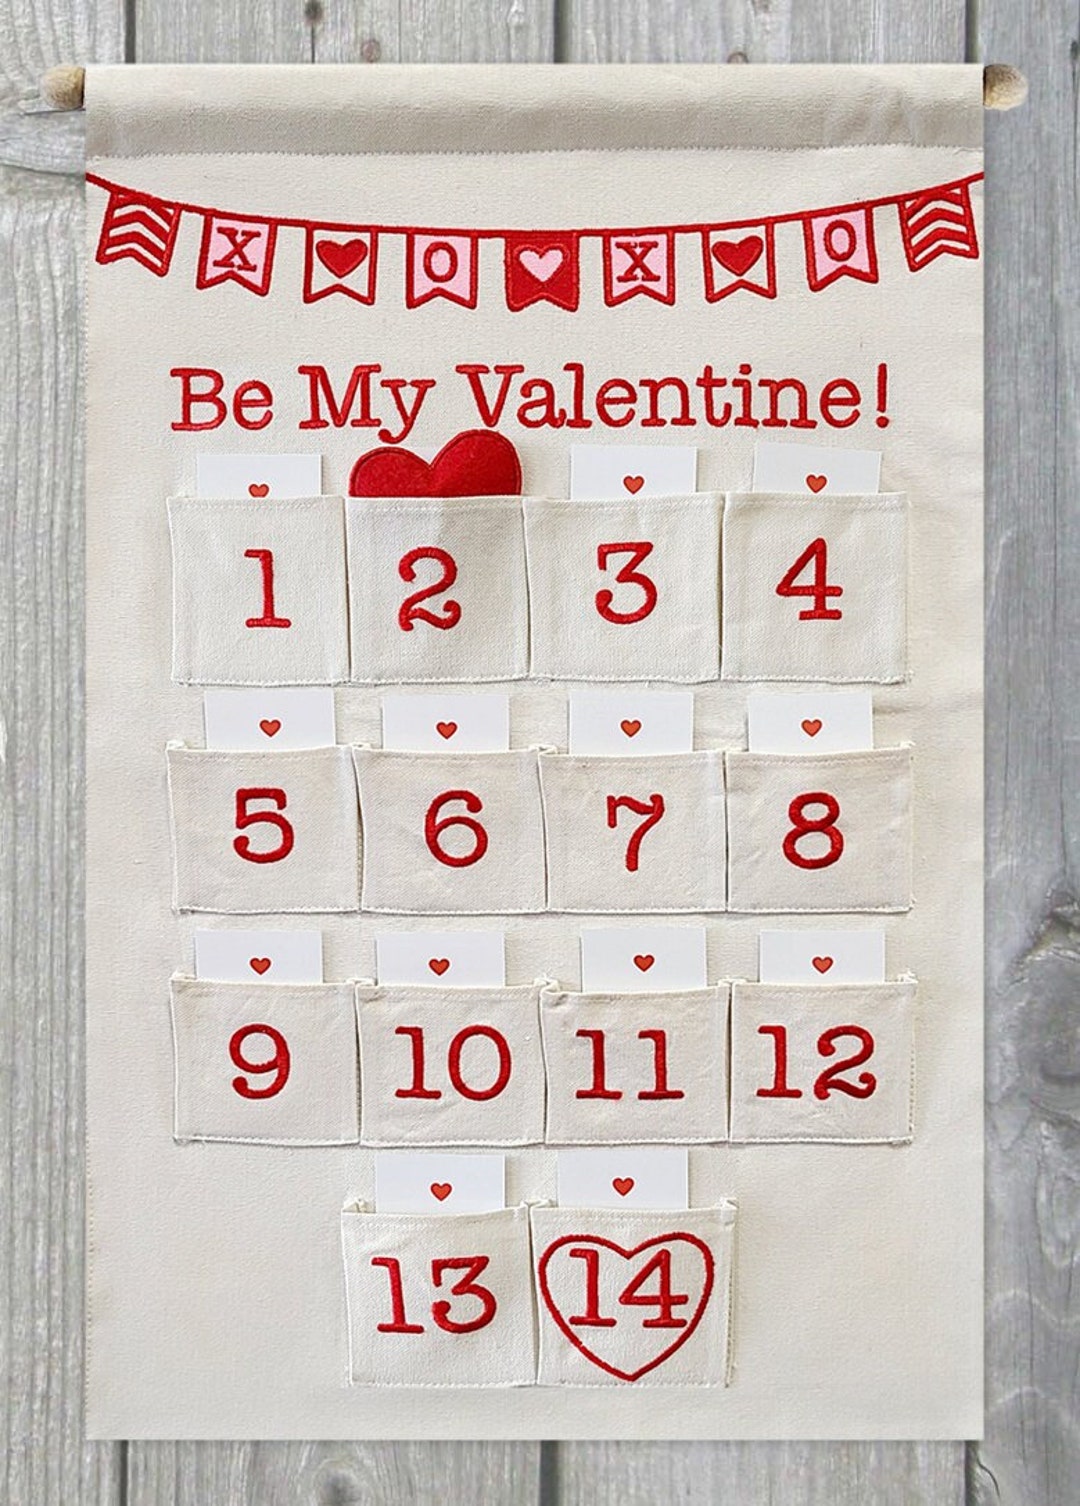 Valentine Countdown Calendar Canvas Wall Hanging Decor W/ Felt Heart Marker  for Families and Kids With Activity Cards by Pockets of Learning -   Norway